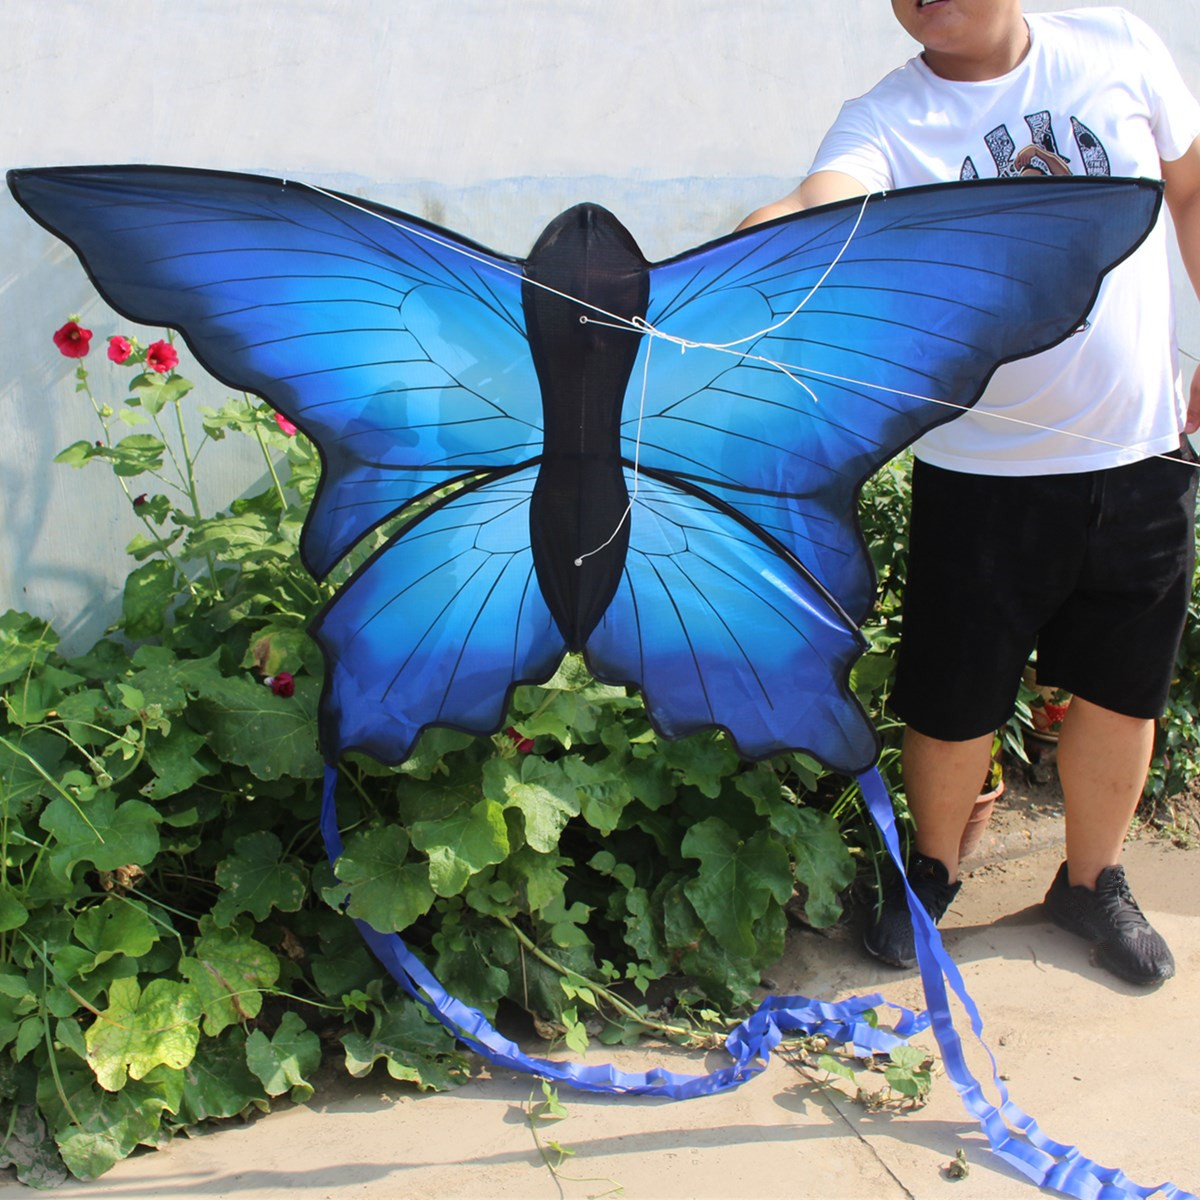 70x150cm-Blue-Beautiful-Butterfly-Kite-Outdoor-Fun-Sports-Flying-Toy-With-30M-Control-Bar-and-Line-1369720